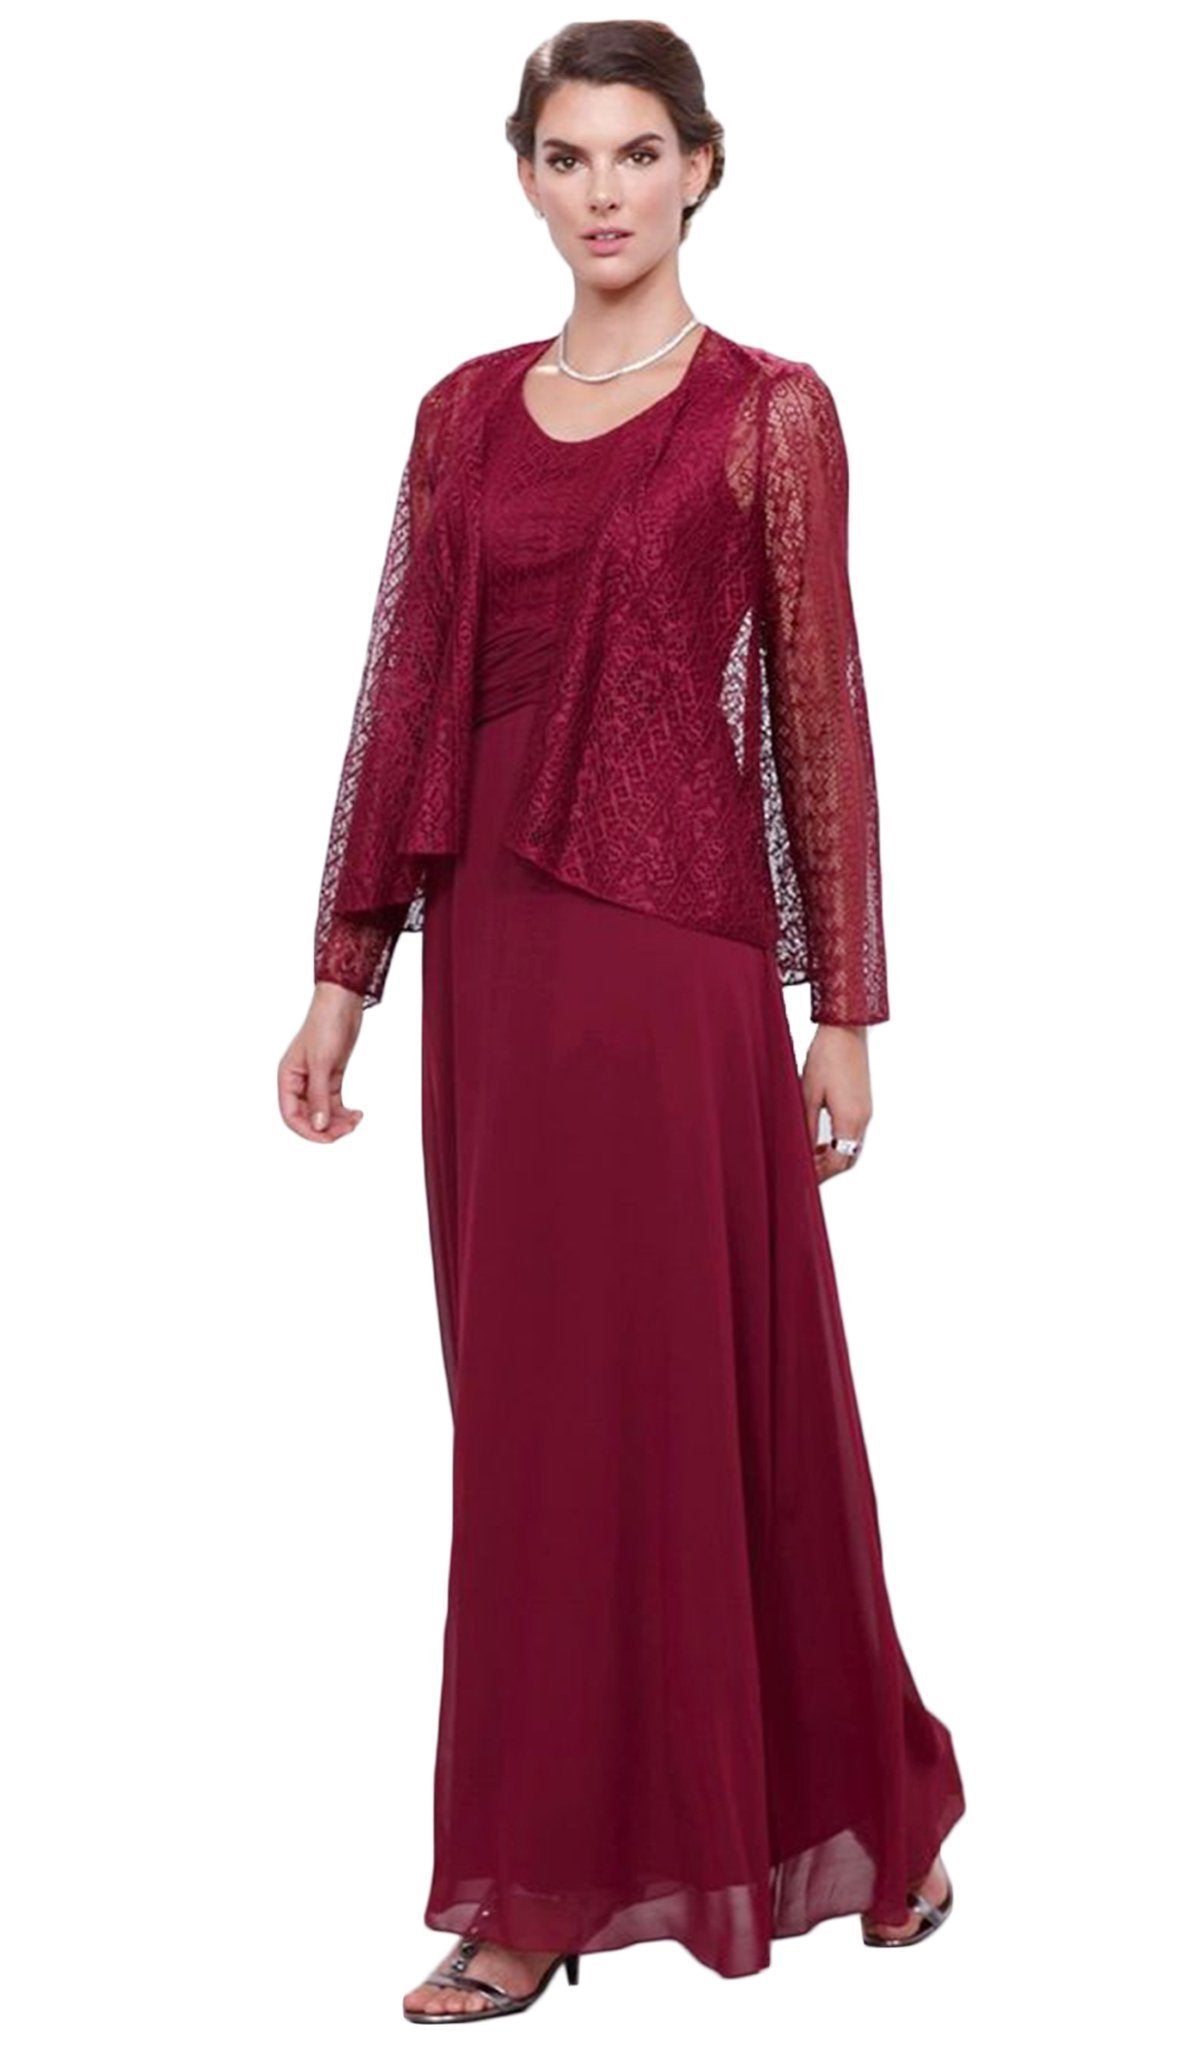 Nox Anabel - 5138 Lace Scoop Neck A-line Dress Special Occasion Dress M / Burgundy